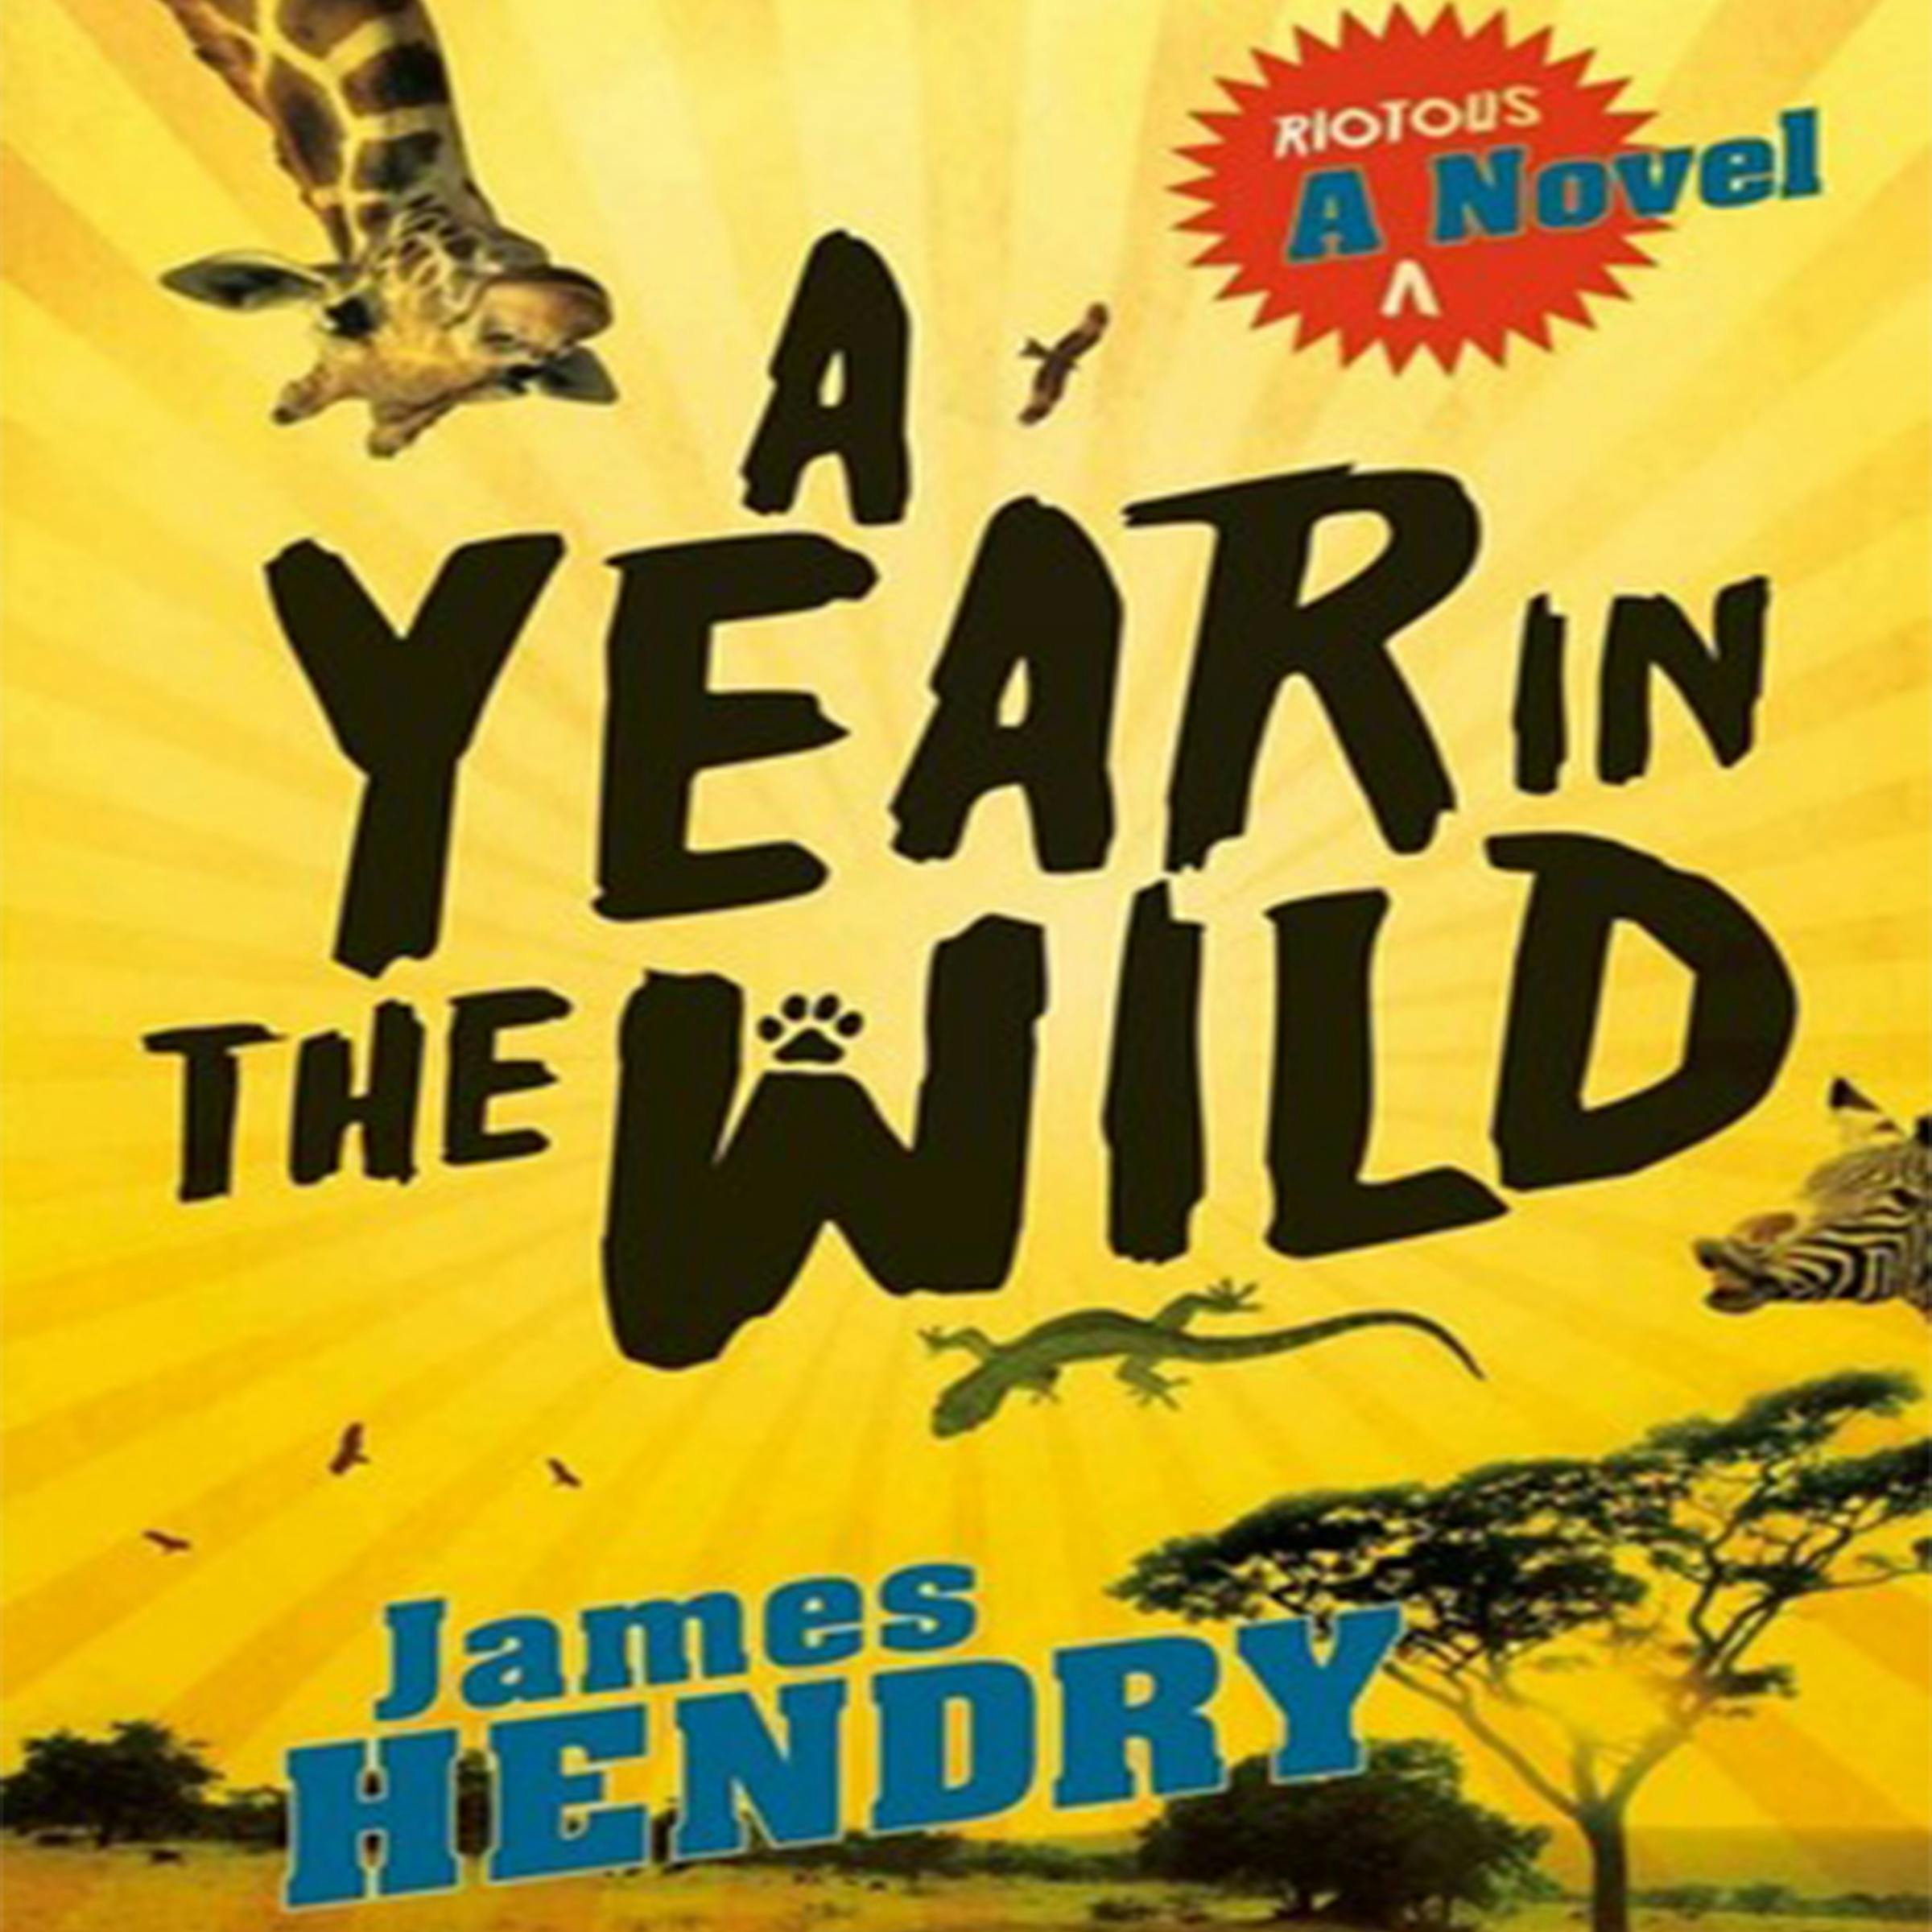 A Year in the Wild: A Riotous Novel - James Hendry